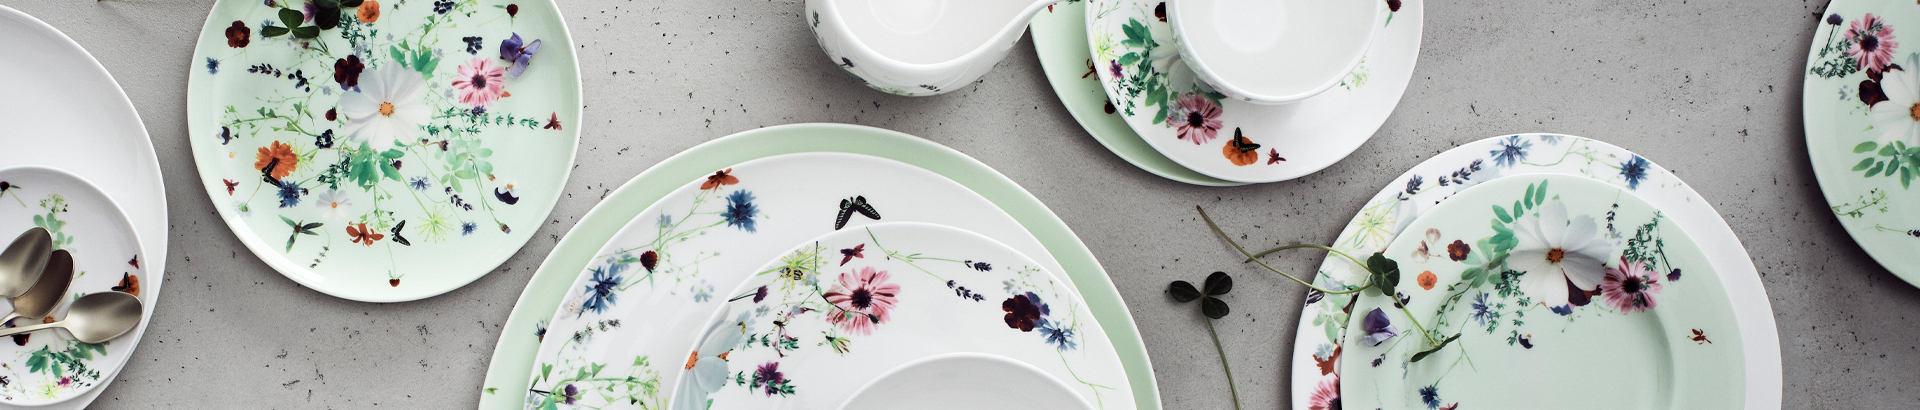 Floral and romantic dinnerware